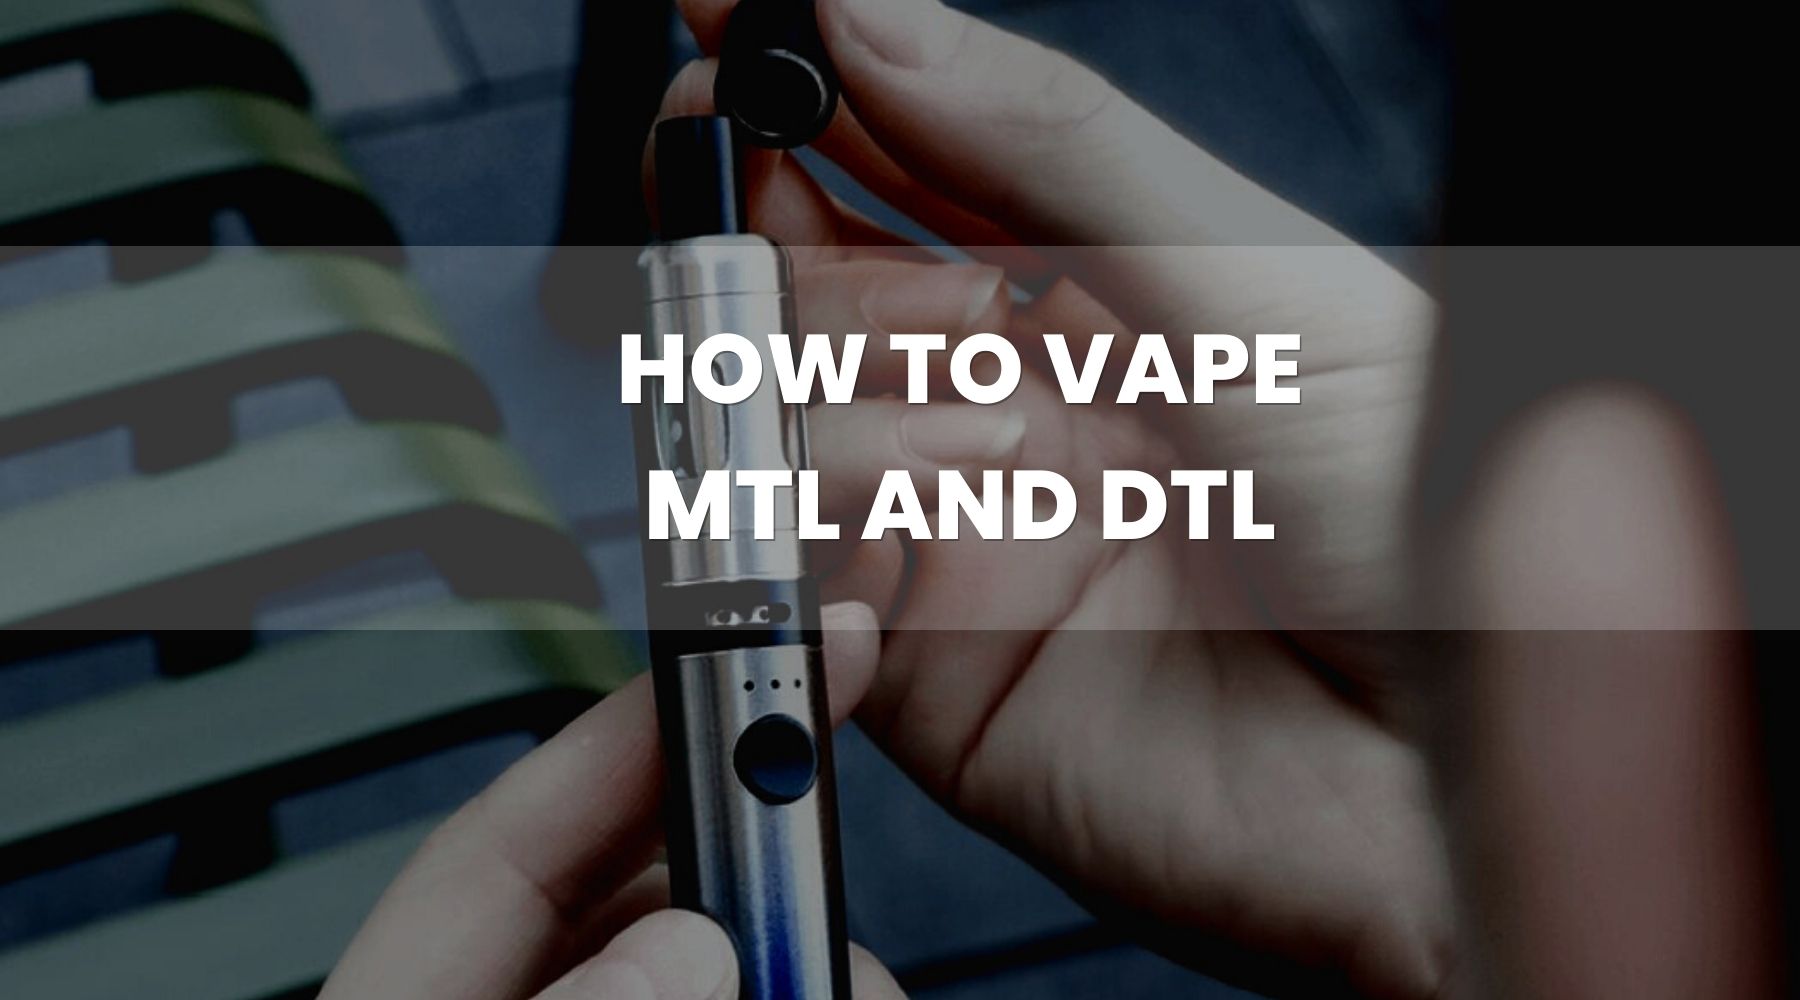 How to Vape MTL and DTL